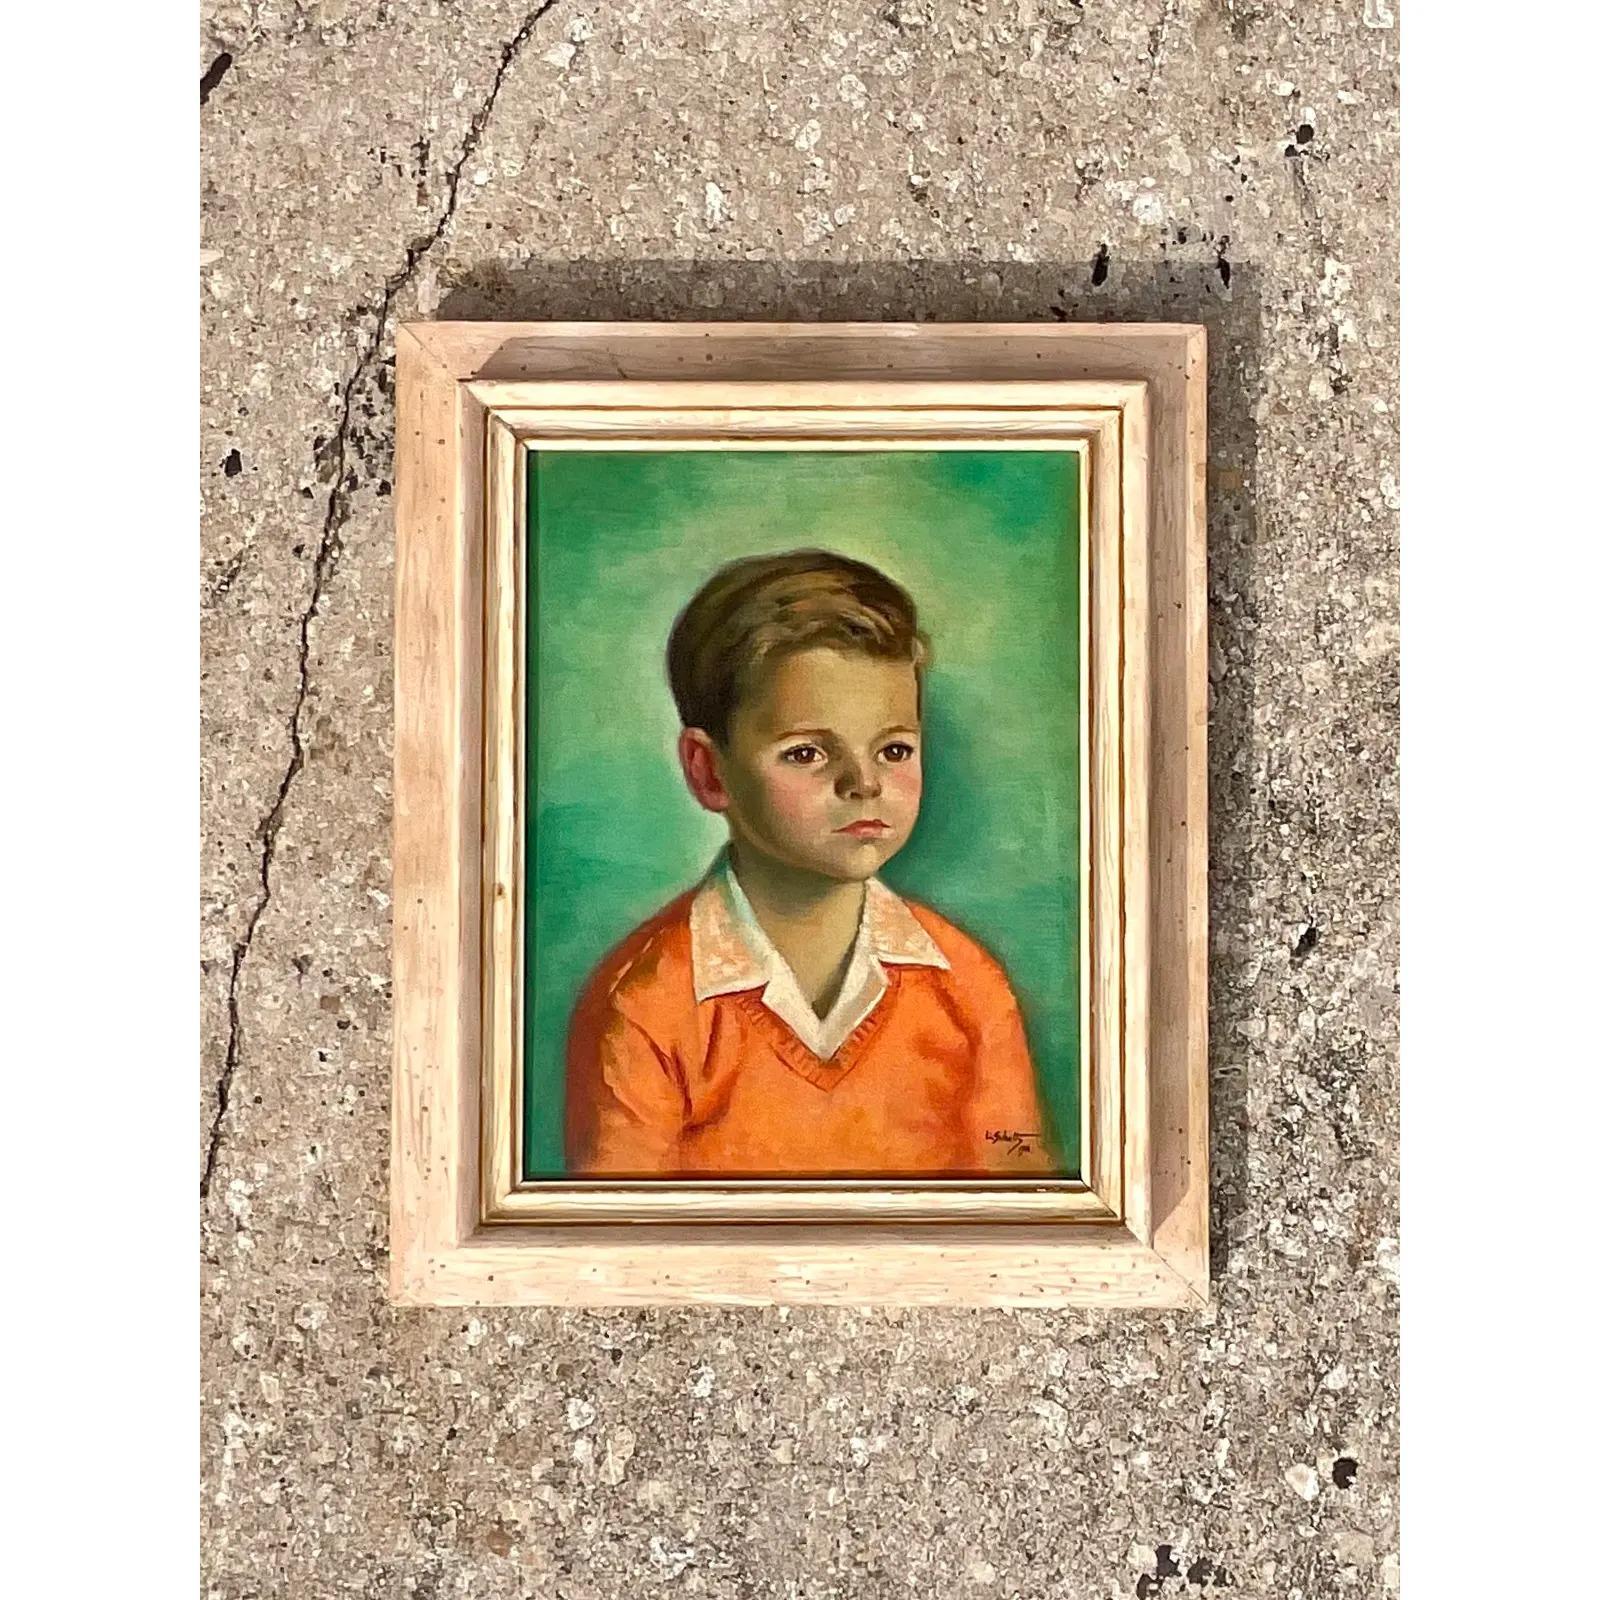 Fantastic vintage Midcentury original oil painting. A chic composition of a young boy in brilliant clear colors. Signed by the artist. Acquired from a Palm Beach estate.